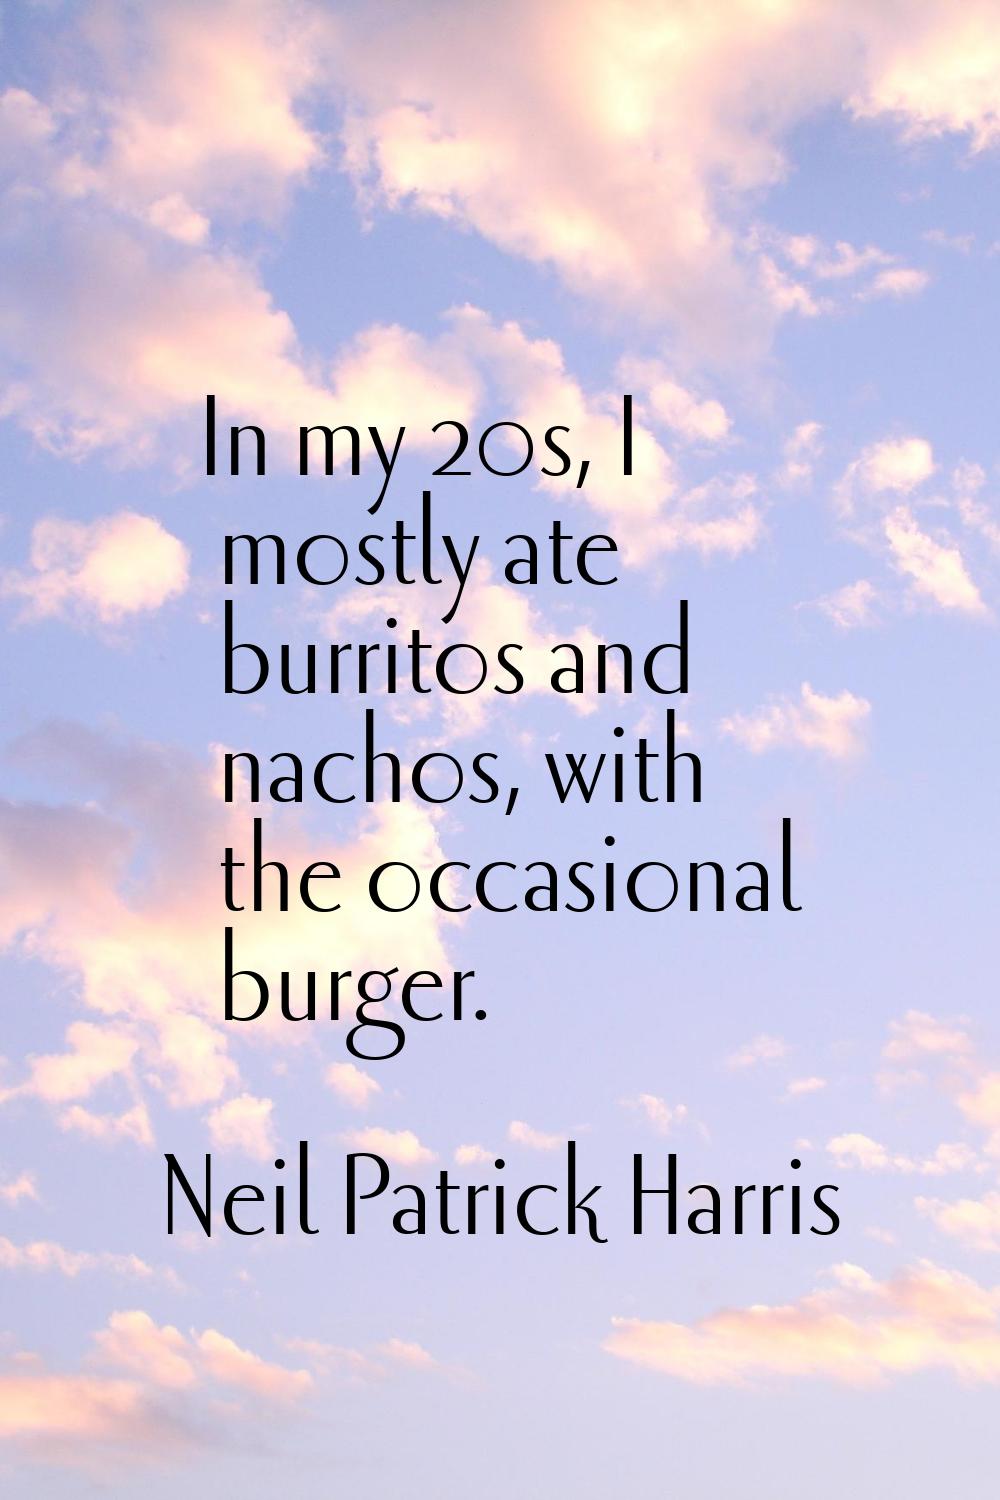 In my 20s, I mostly ate burritos and nachos, with the occasional burger.